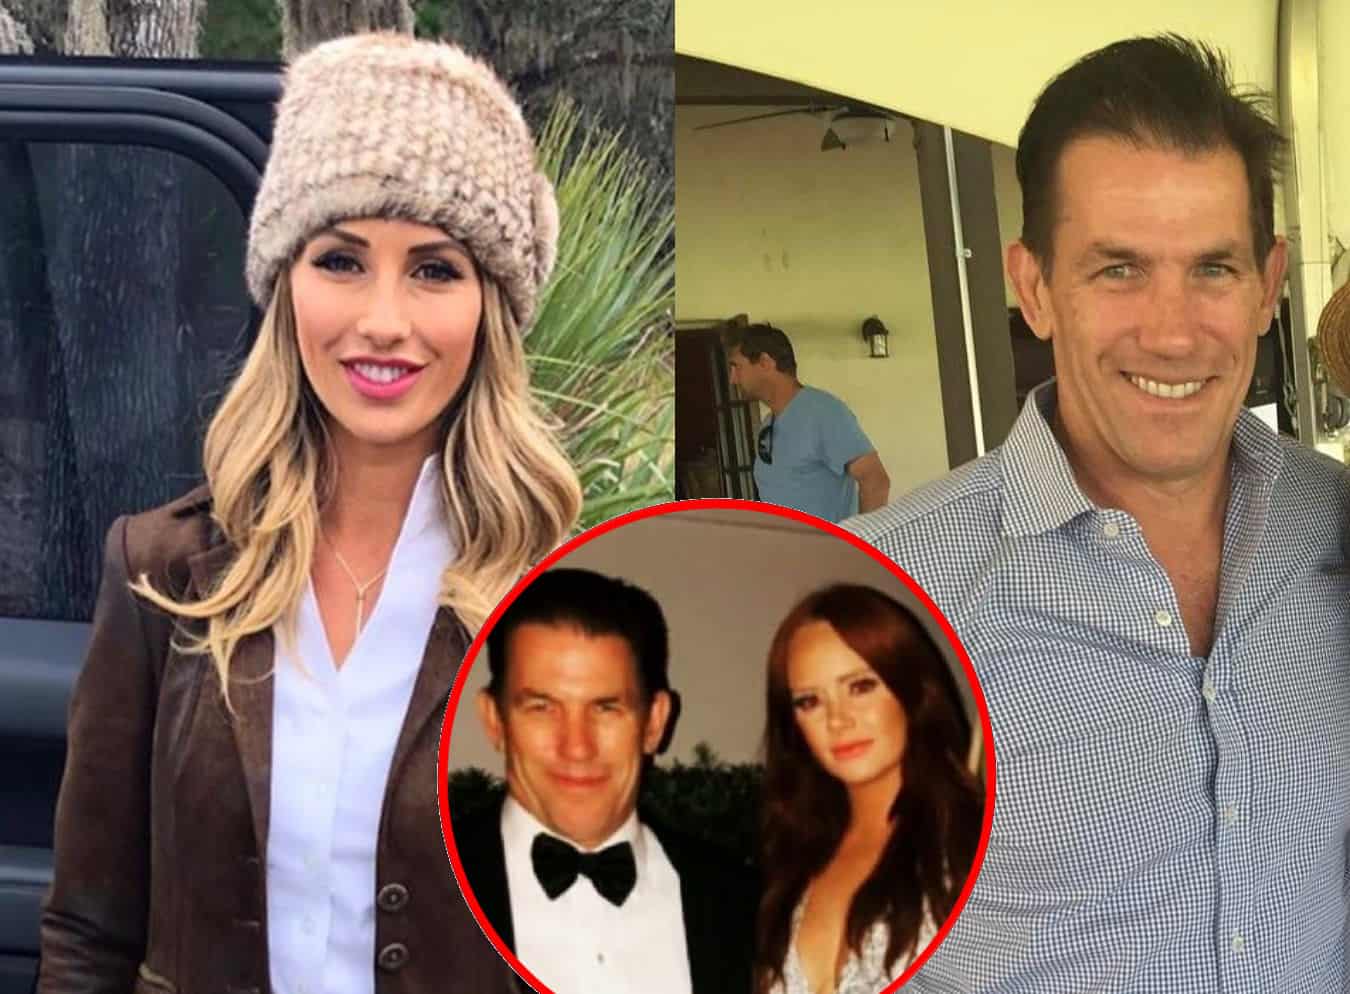 Southern Charm's Ashley Jacobs Shades Thomas Ravenel as "Toxic" and Reacts to His Reunion With Kathryn Dennis